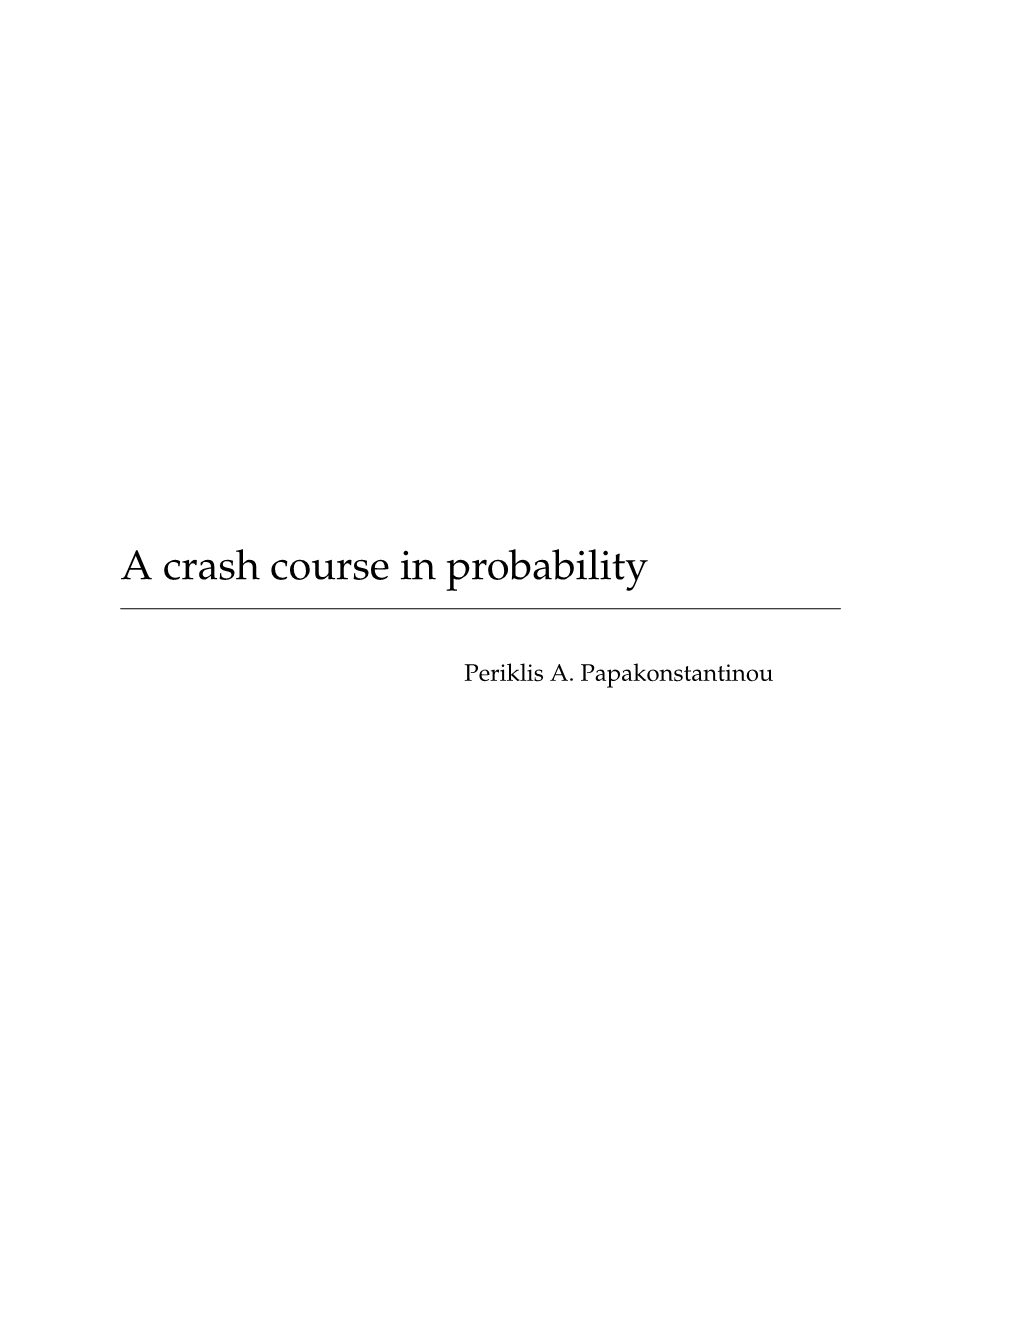 A Crash Course in Probability